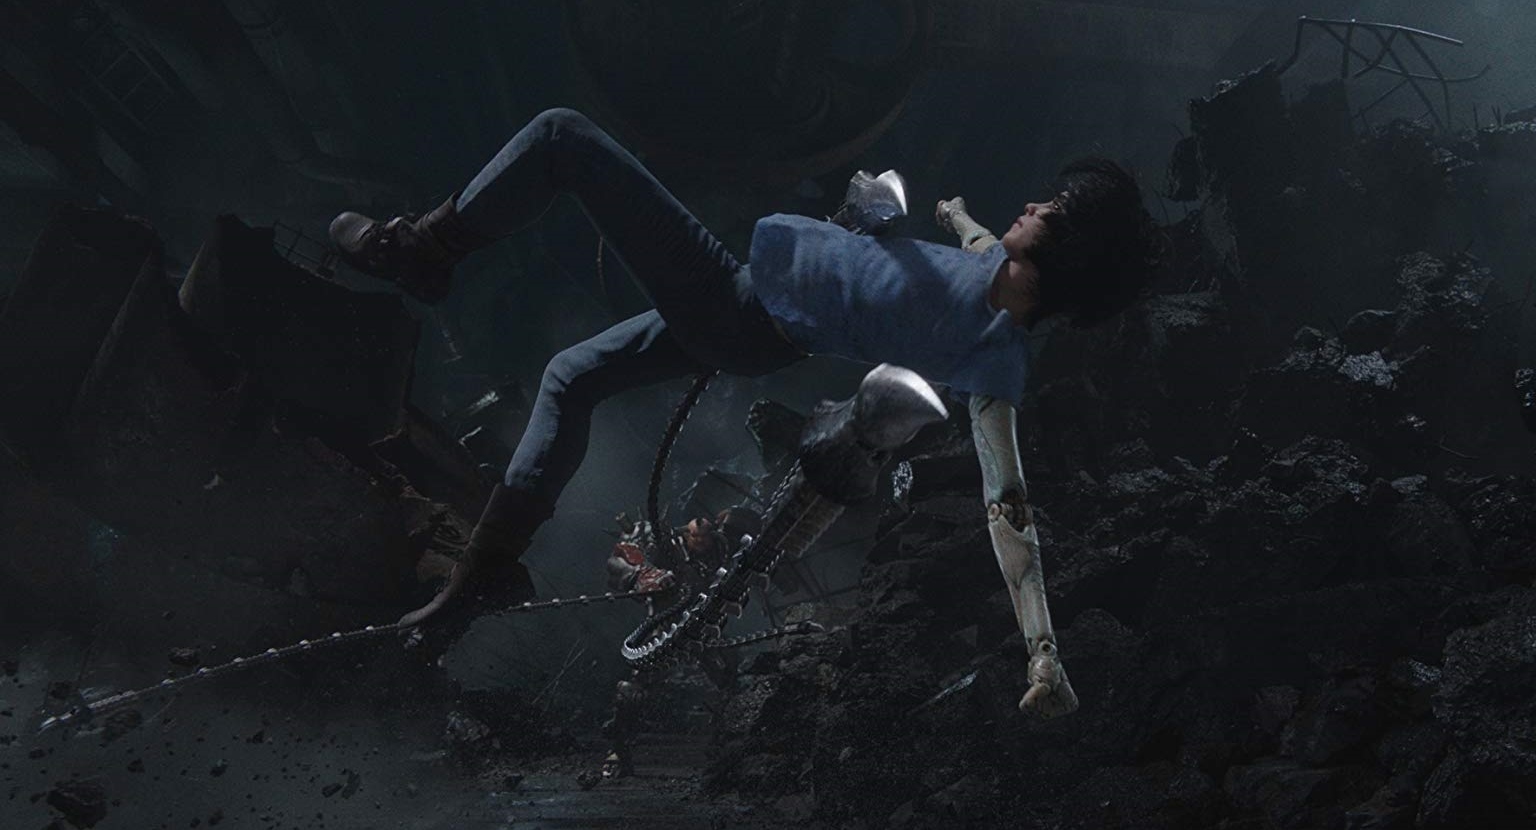 ALITA: BATTLE ANGEL Looks Great, But Lacks a Compelling Story